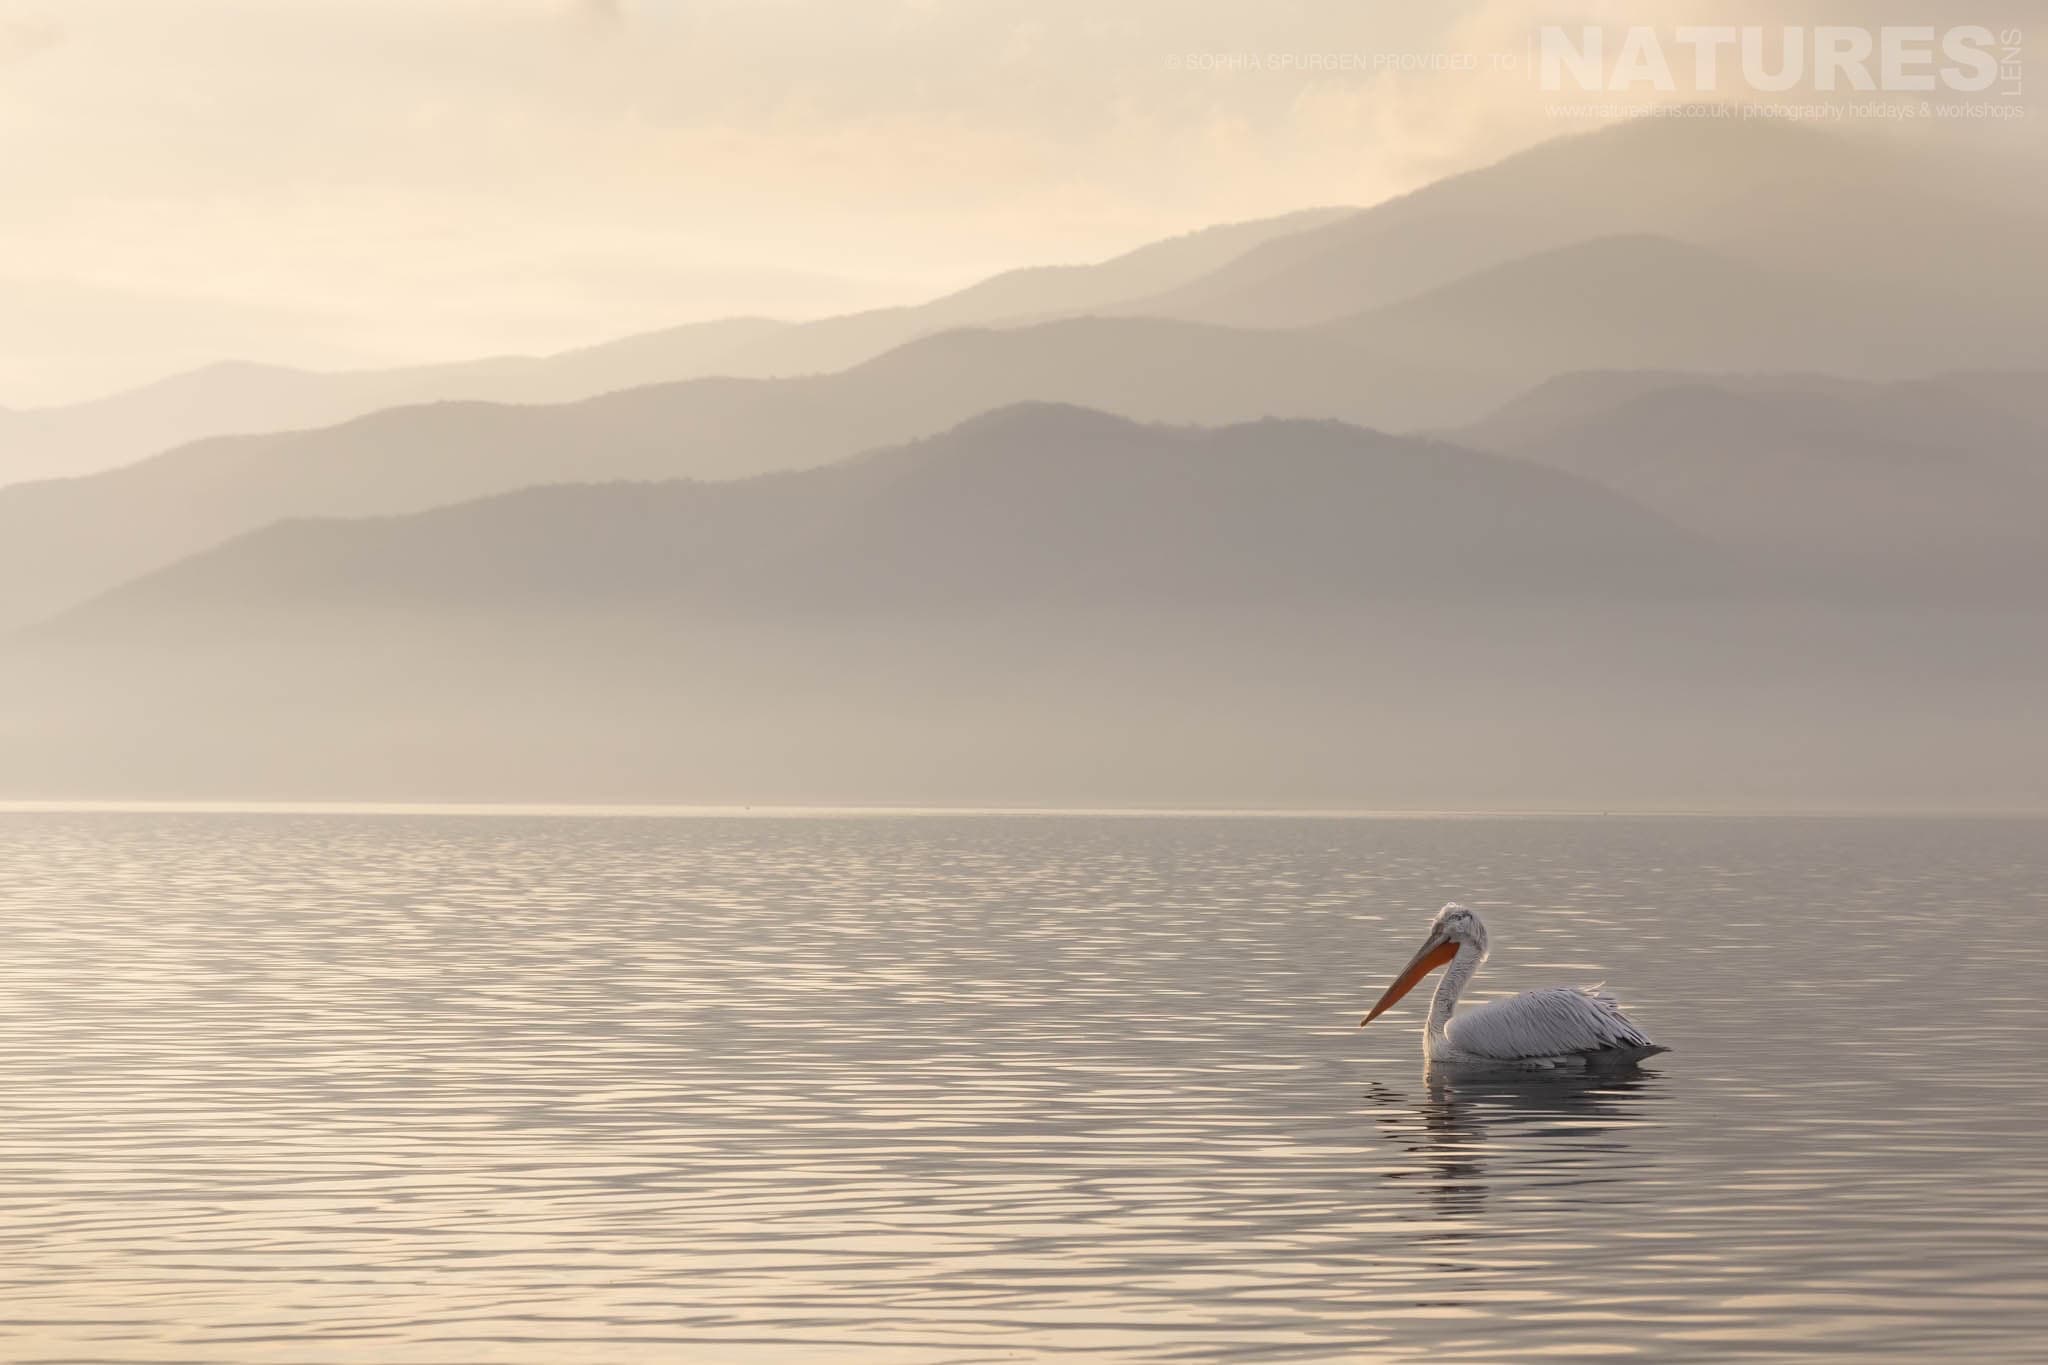 One Of The Dalmatian Pelicans Of Greece Glides Gently On The Waters Of Lake Kerkini With The Mountains As A Layered Backdrop